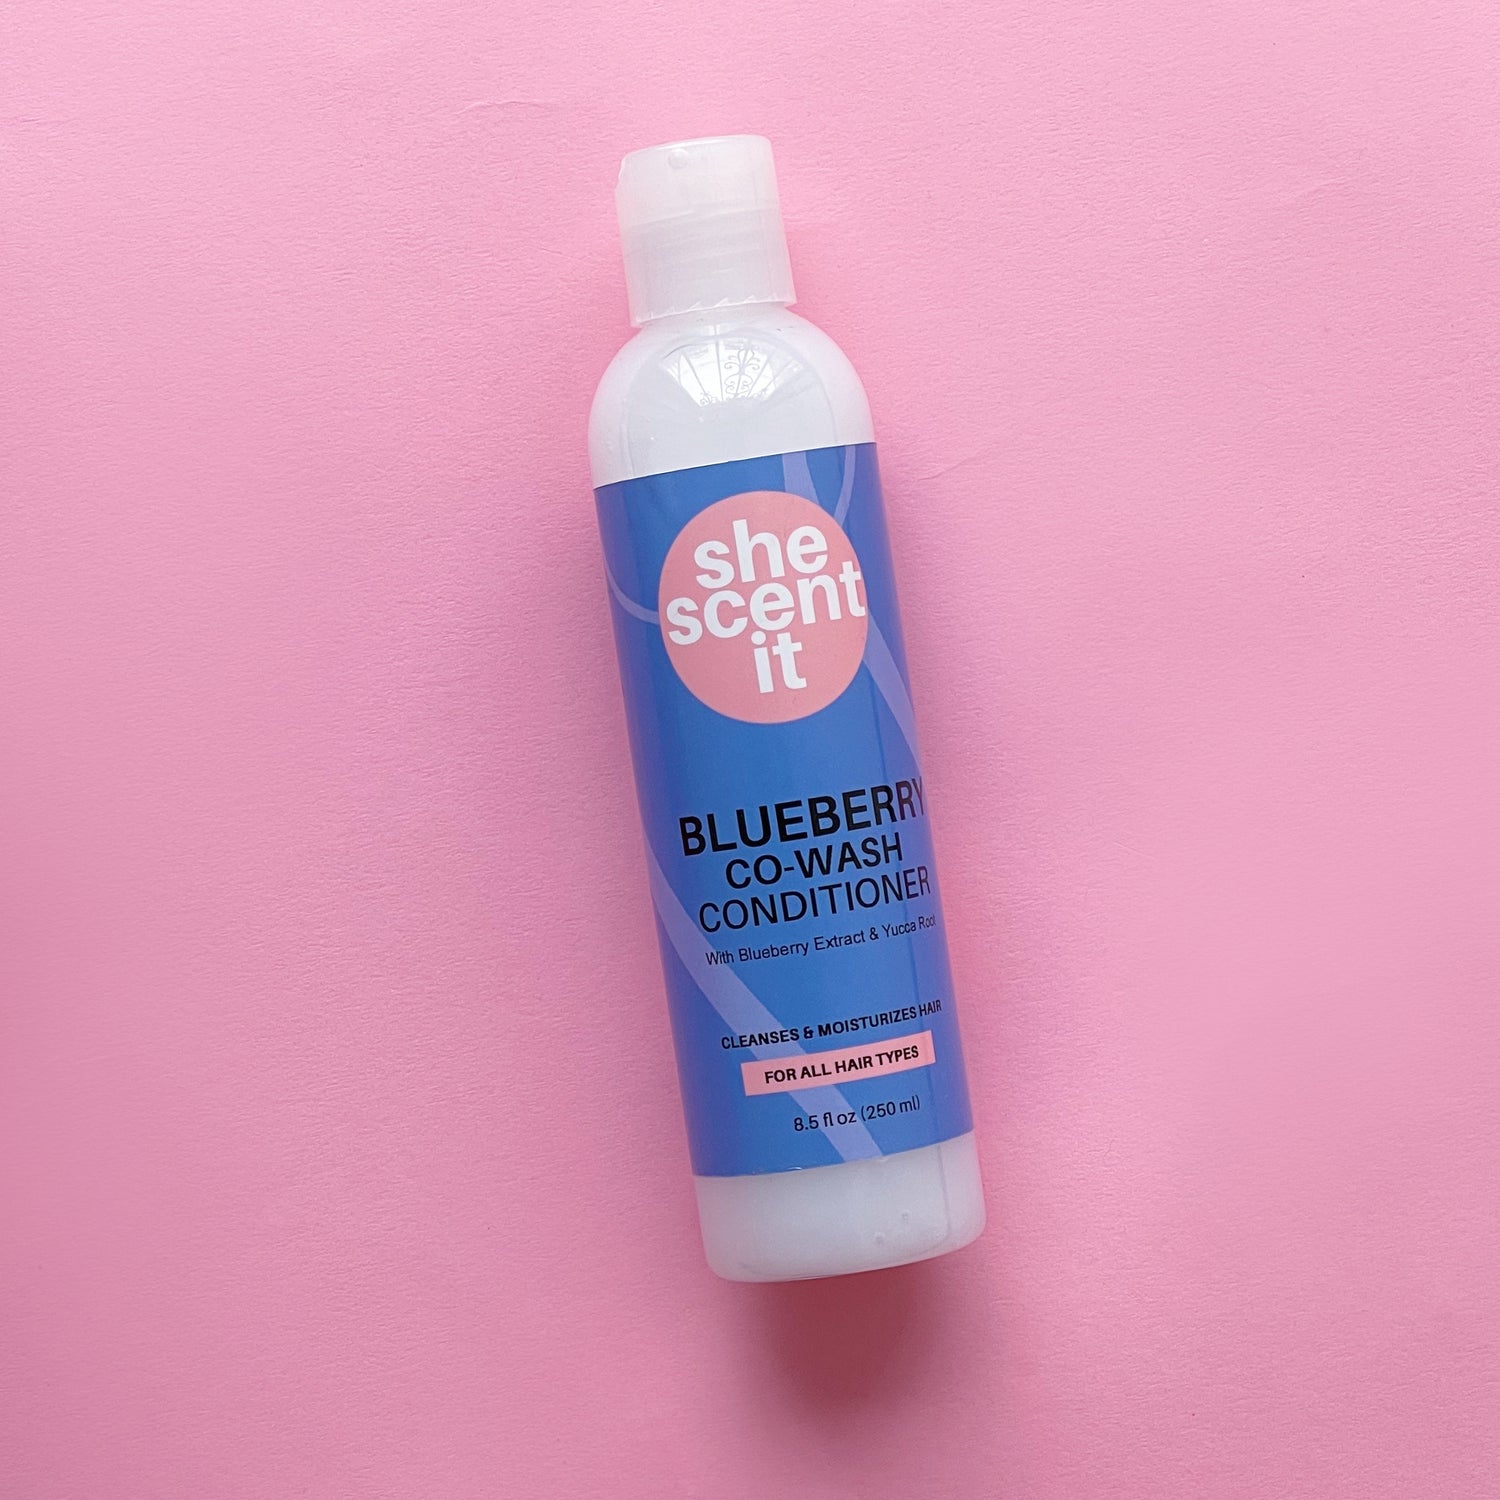 Blueberry Co-Wash Conditioner